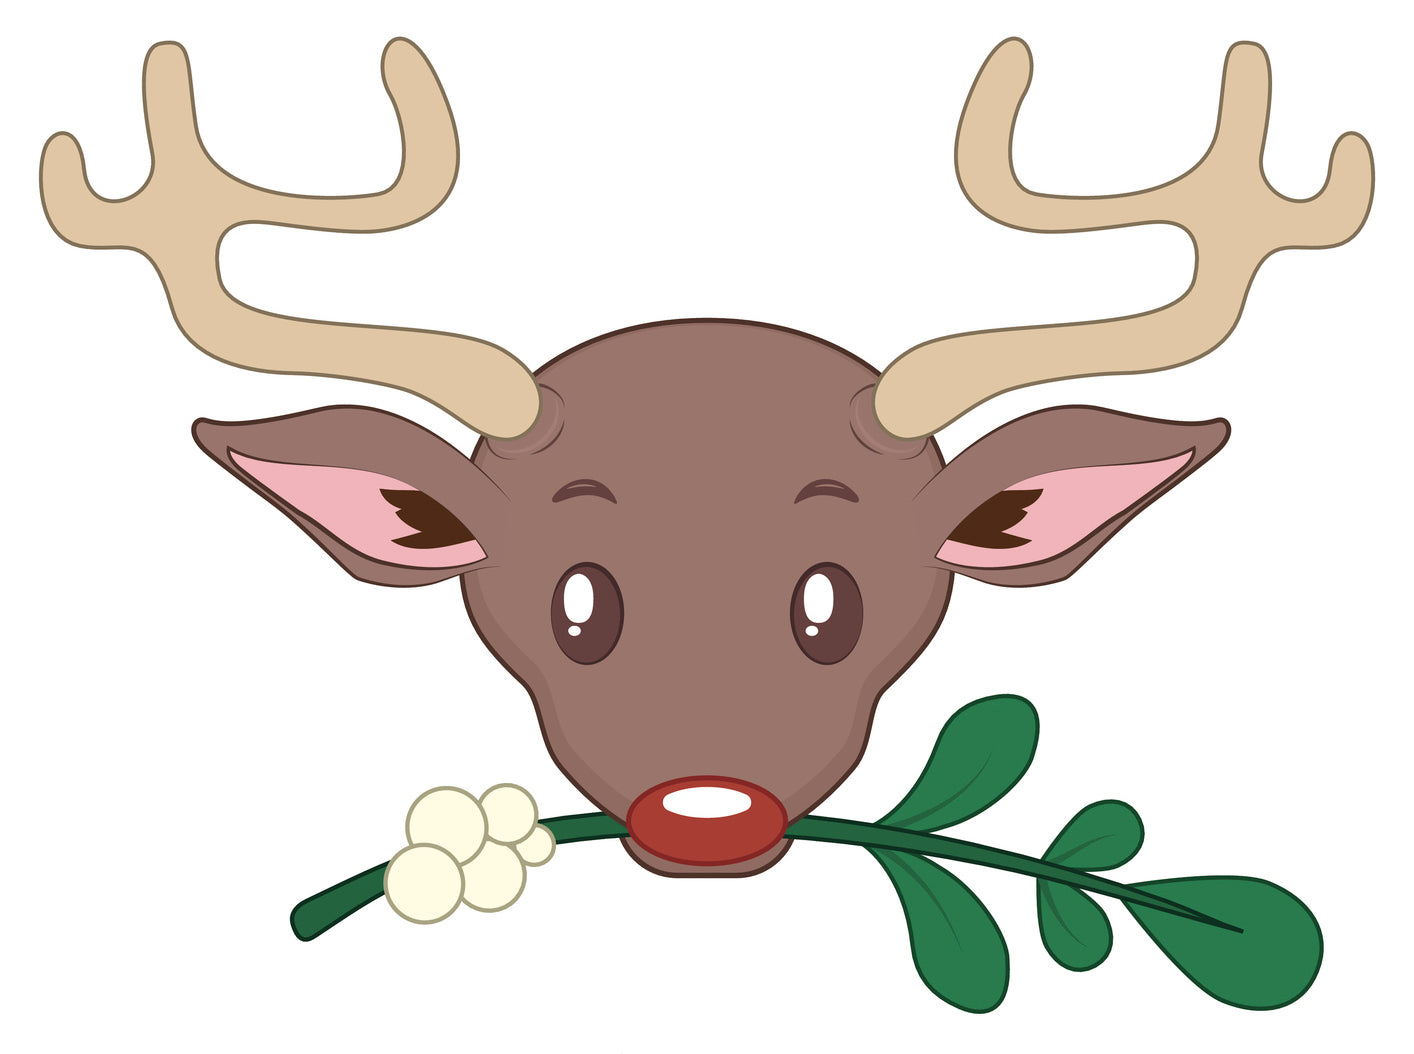 Rudolph the Red Nosed Reindeer with Holly Branch Vinyl Decal Sticker